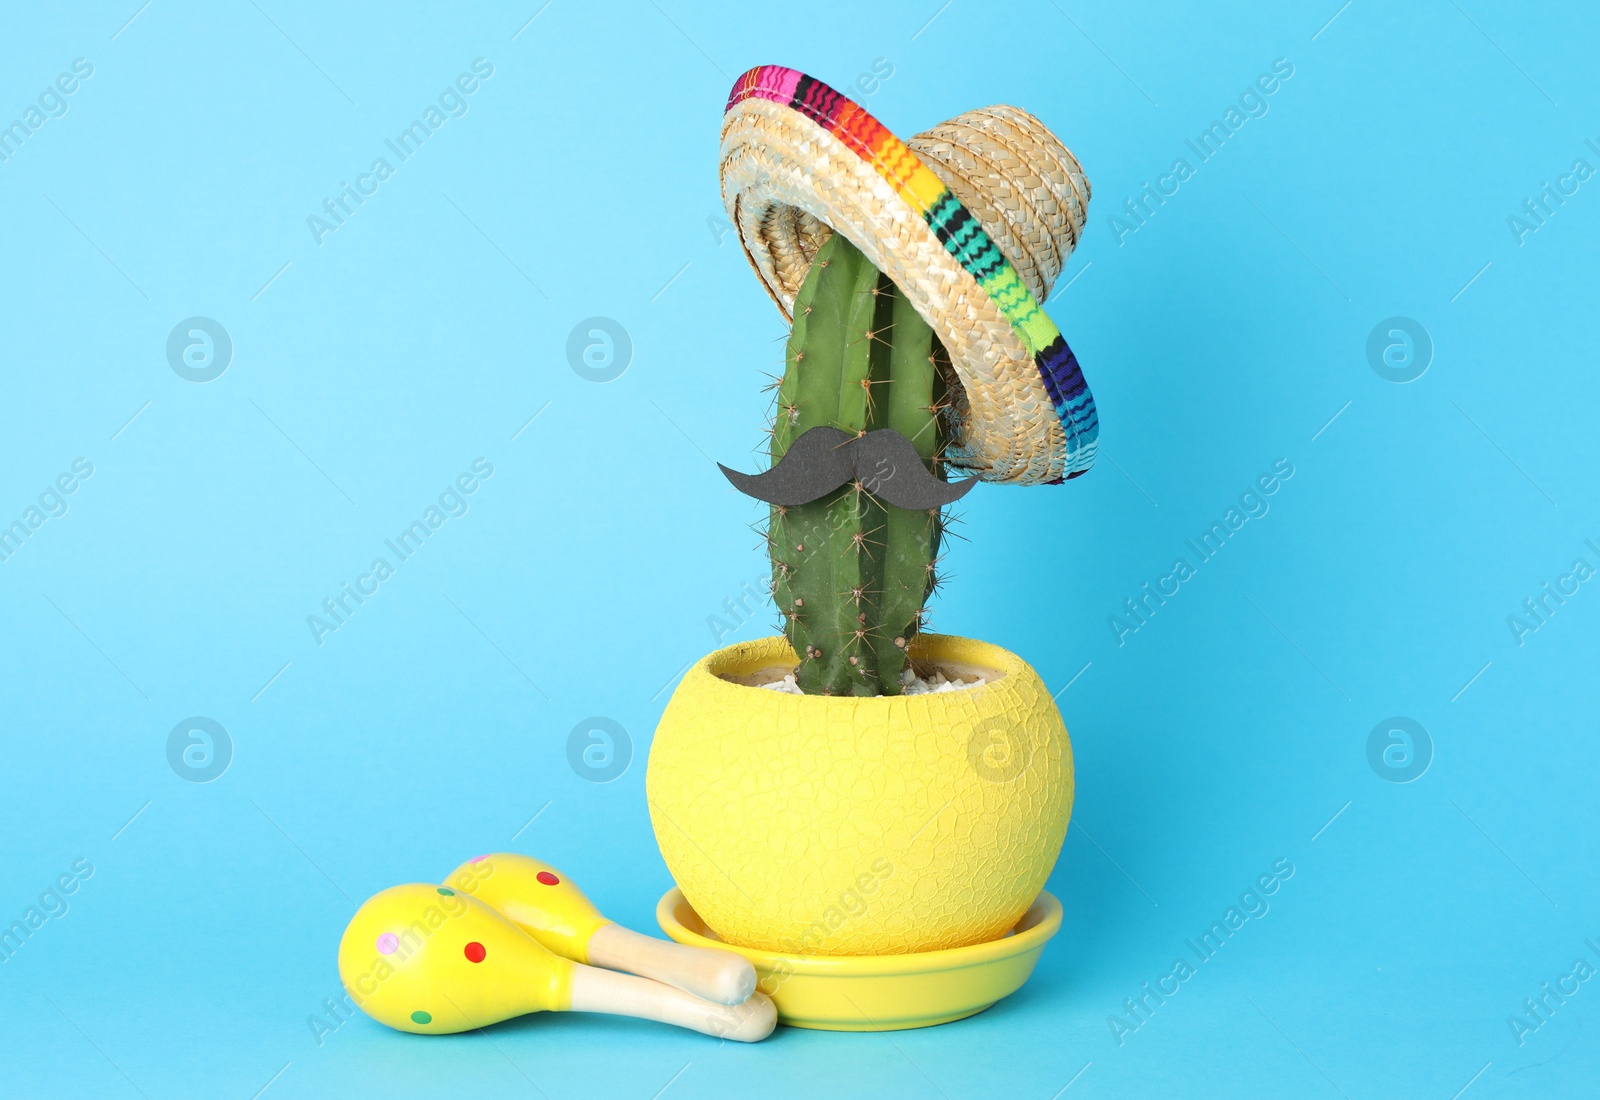 Photo of Mexican sombrero hat, cactus with fake mustache and maracas on light blue background